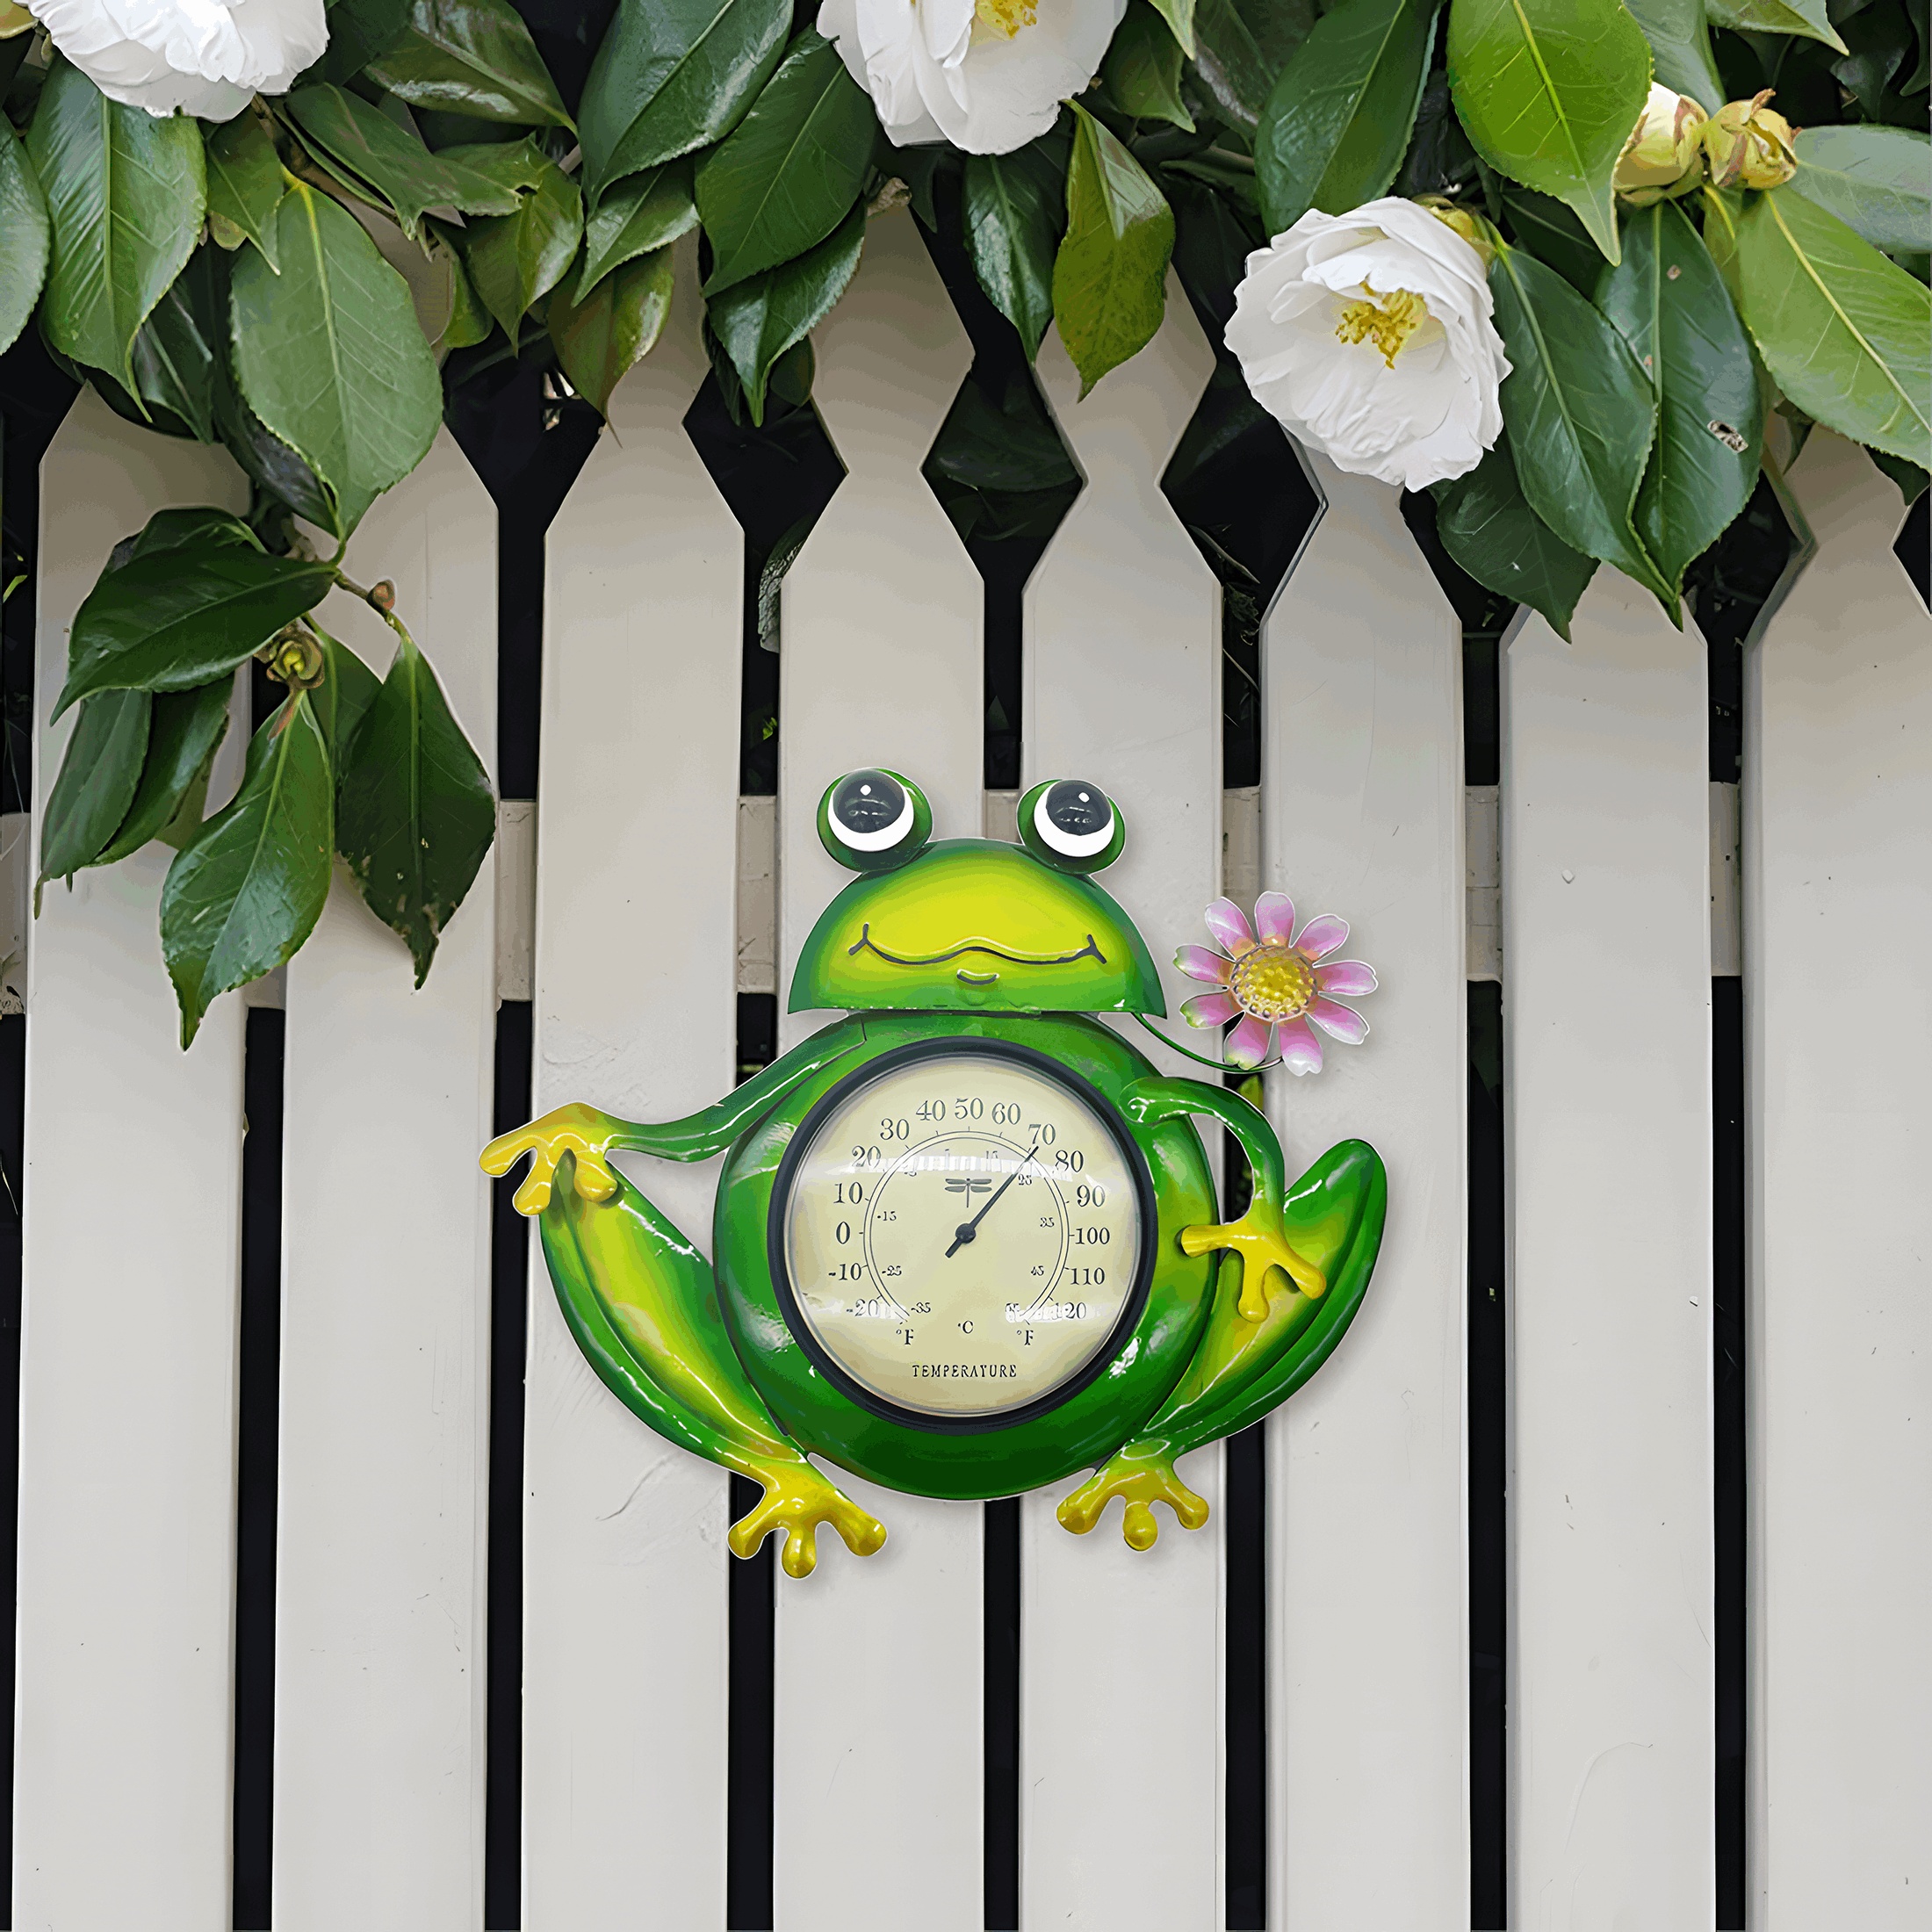 

Cute Frog Outdoor Thermometer 10-inch - Waterproof, Durable Metal Digital Temperature Gauge, Decorative Art Design For Garden, Patio, Living Room - Battery-free, Single-use, Adult Age Range